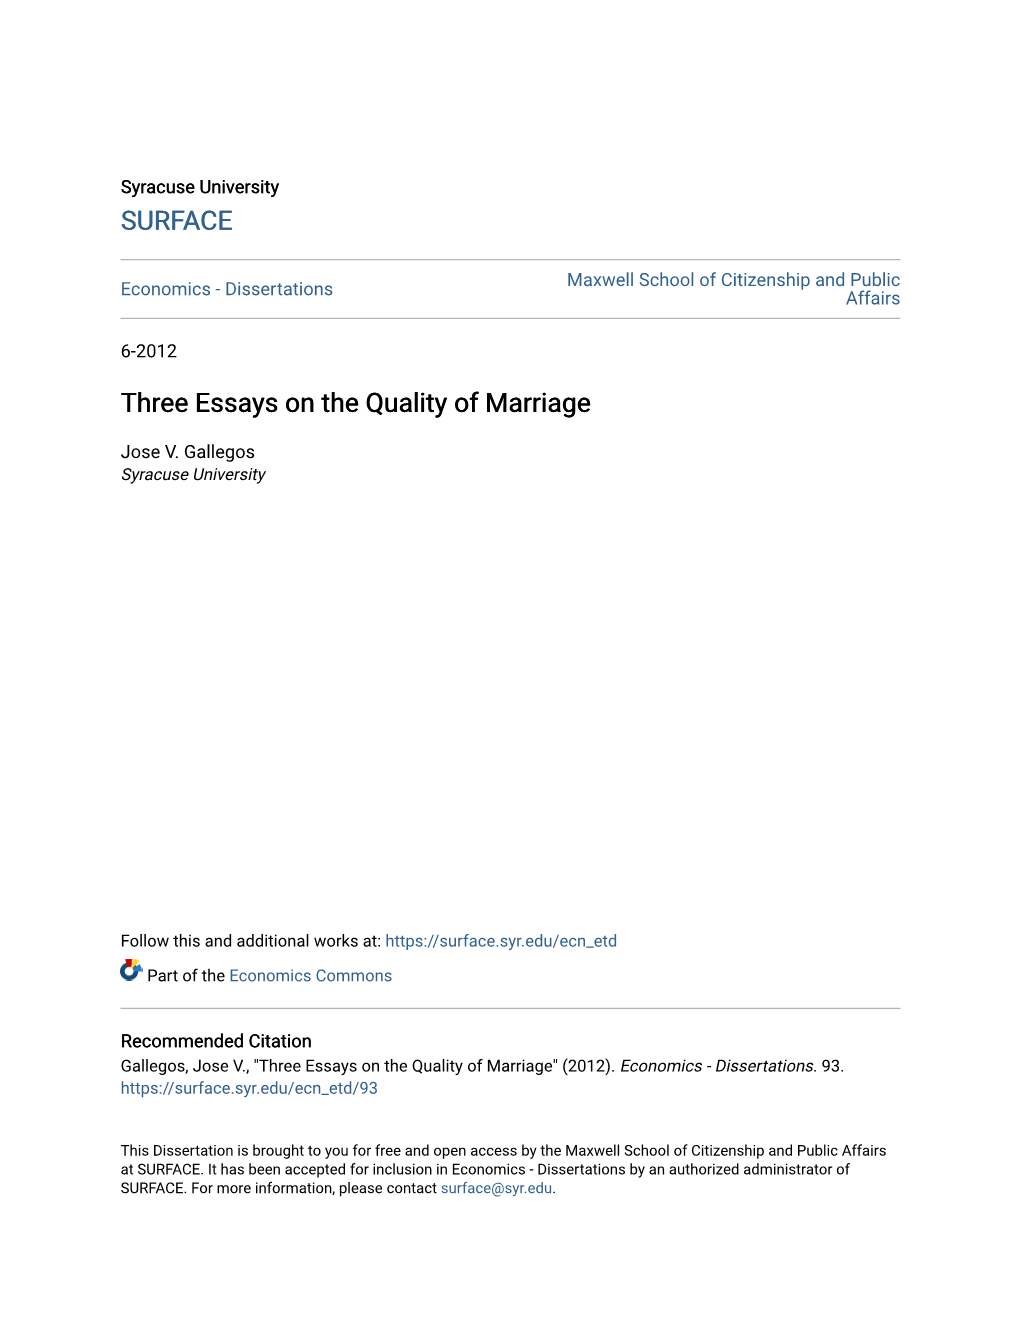 Three Essays on the Quality of Marriage